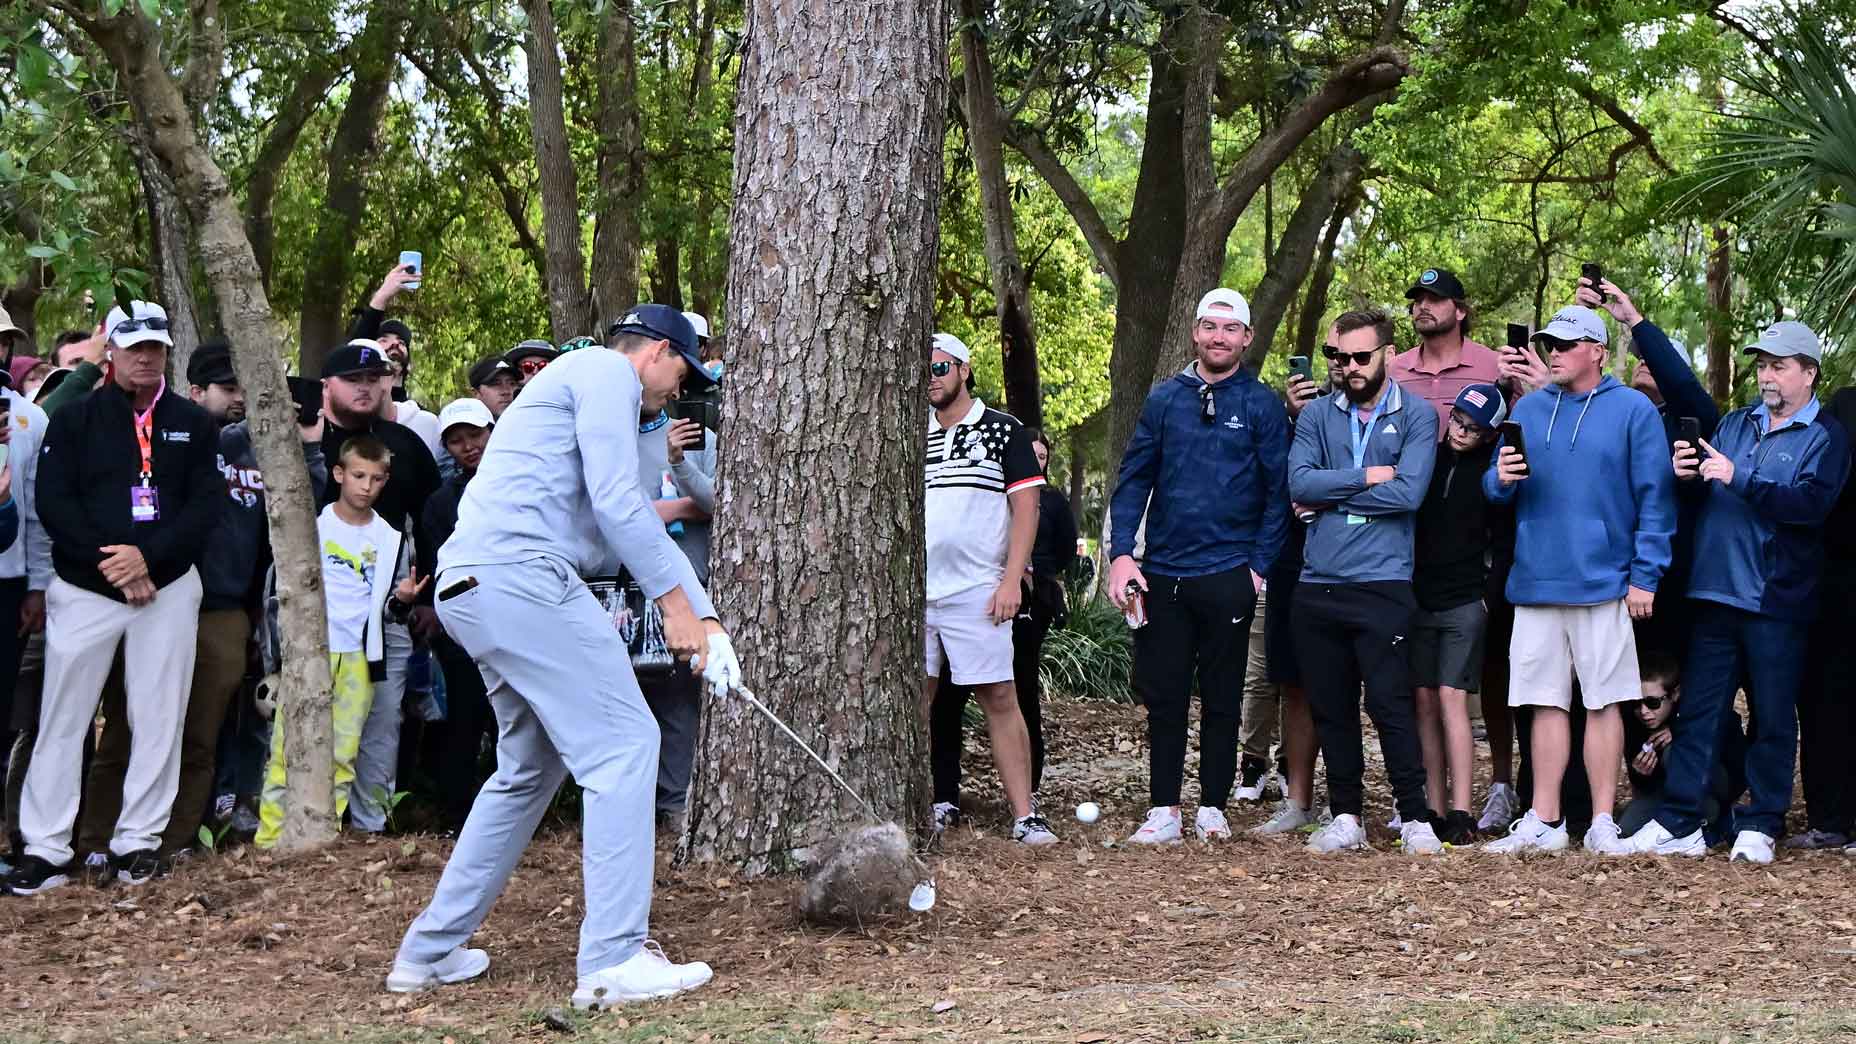 Adam Schenk of the United States plays an approach shot on the 18th hole as fans look on during the final round of the Valspar Championship at Innisbrook Resort and Golf Club on March 19, 2023 in Palm Harbor, Florida.